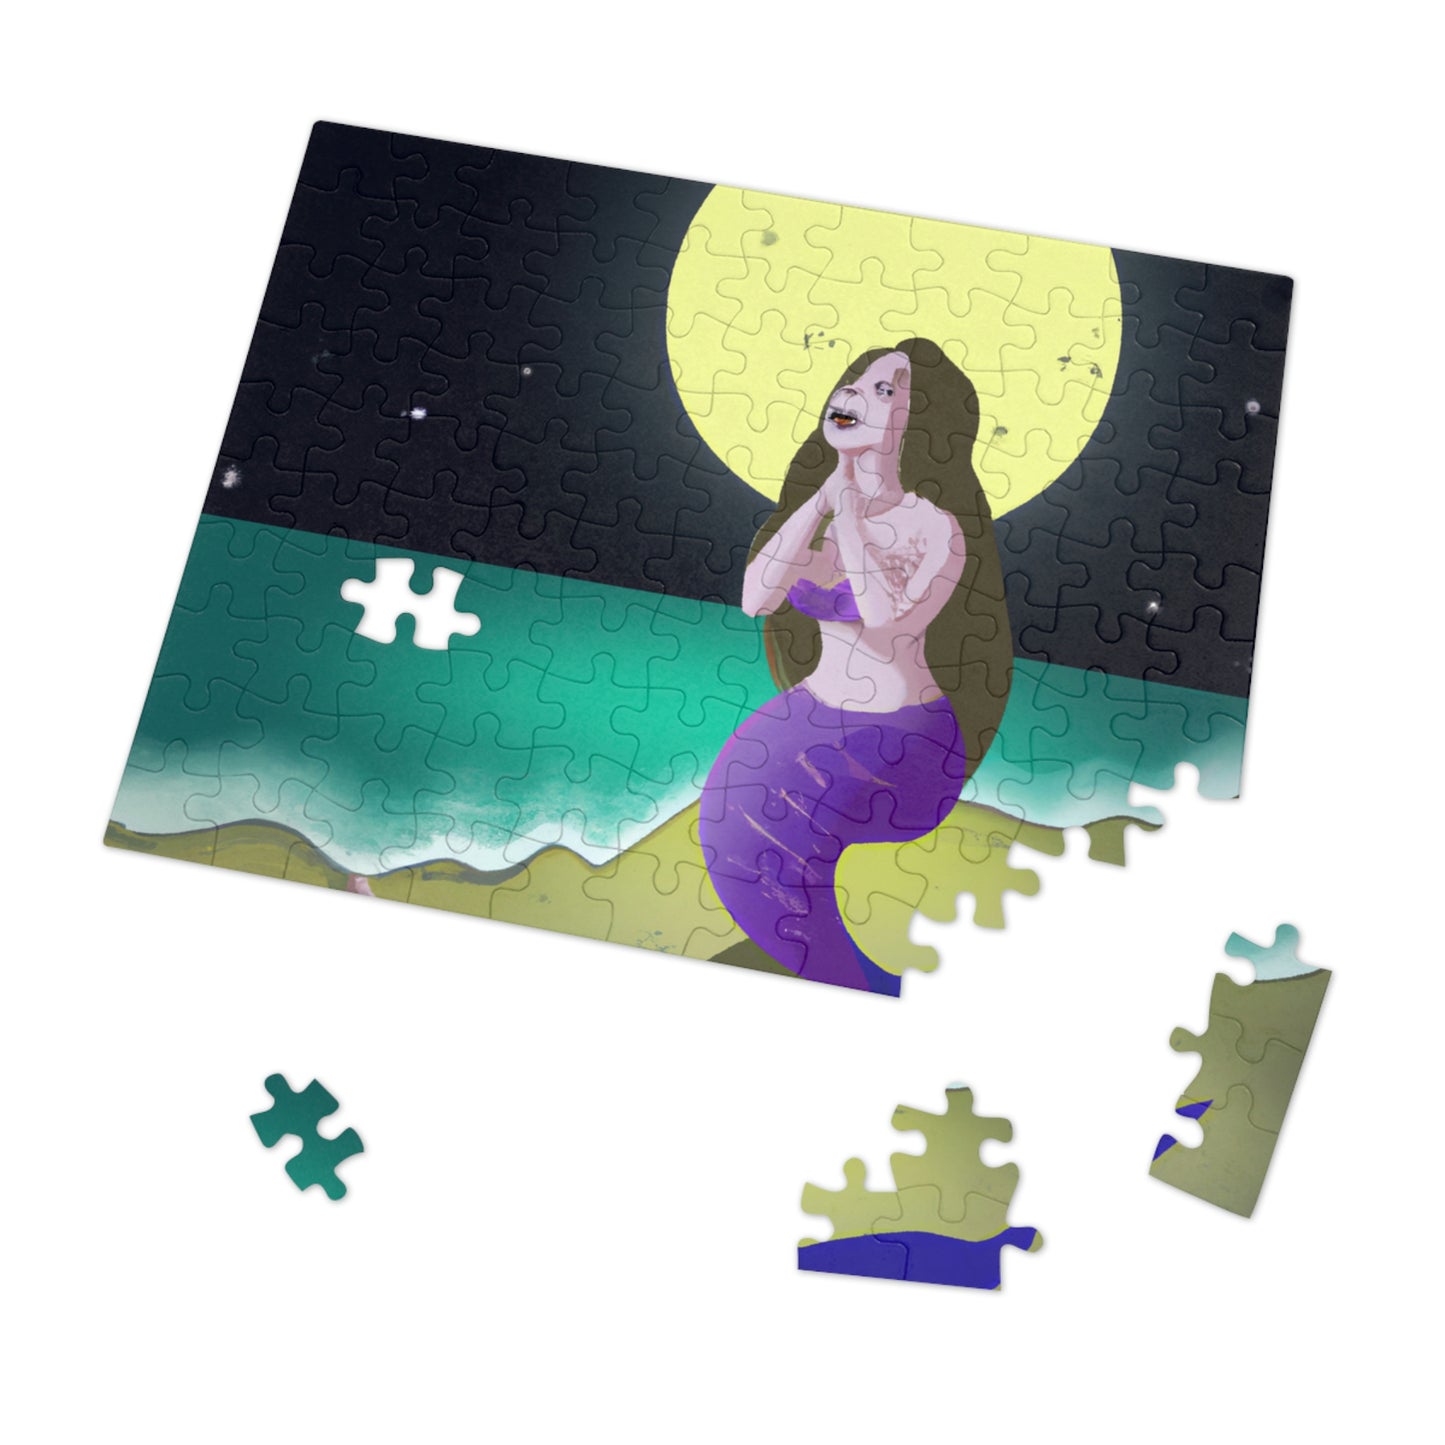 "The Mermaid's Lament" - The Alien Jigsaw Puzzle